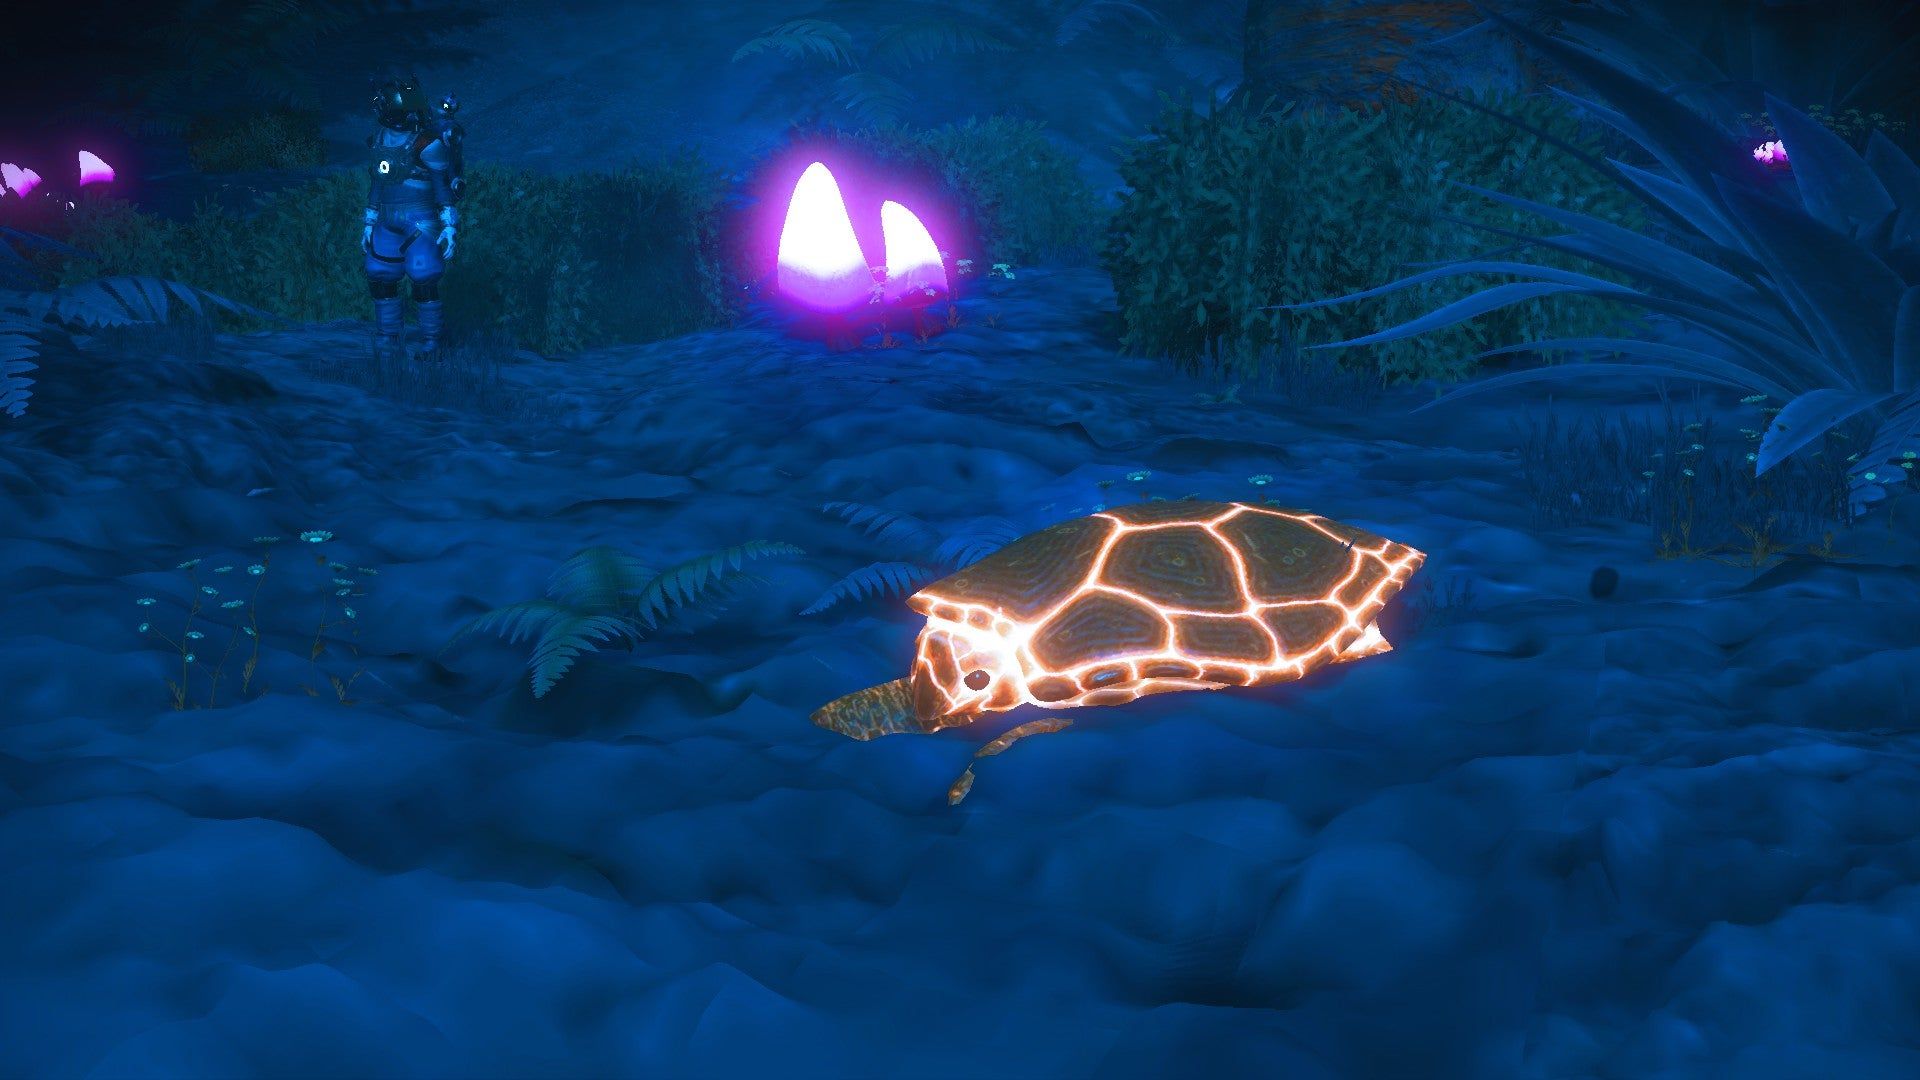 found a vapor planet with glowing fungus and neon turtles